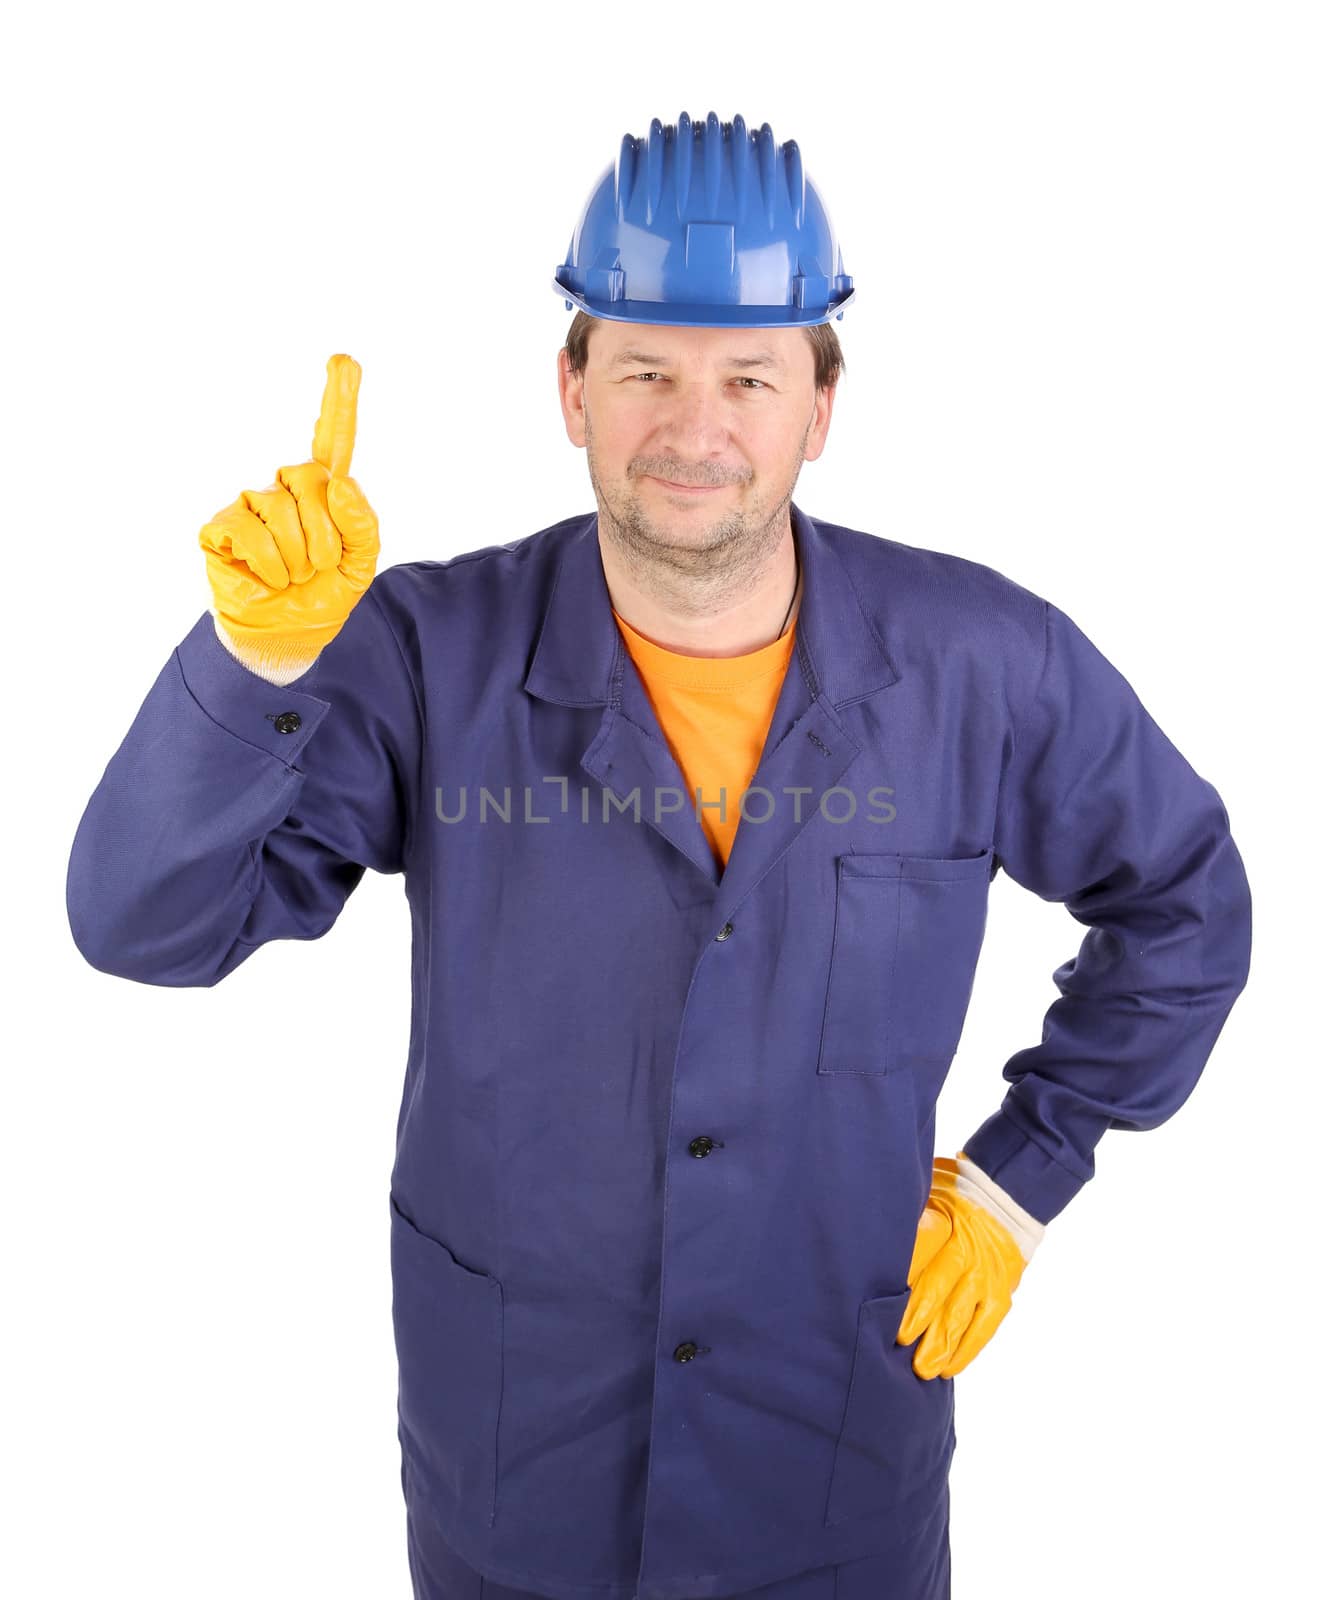 Worker shows hand attracting attention. Isolated on a white background.